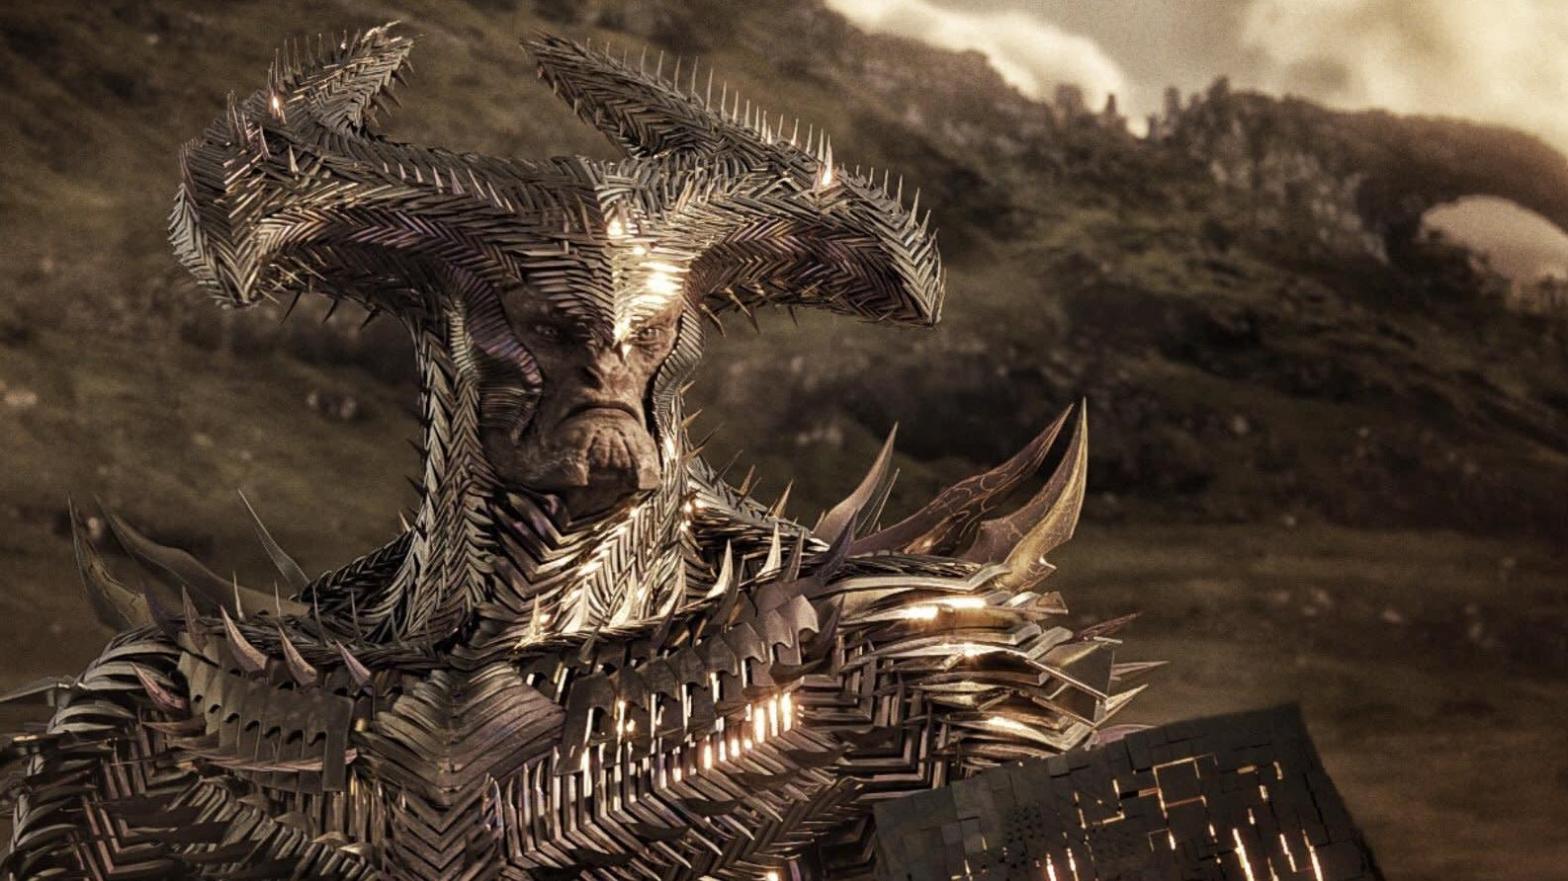 The new-look Steppenwolf in Zack Snyder's Justice League. (Image: Warner Bros.)